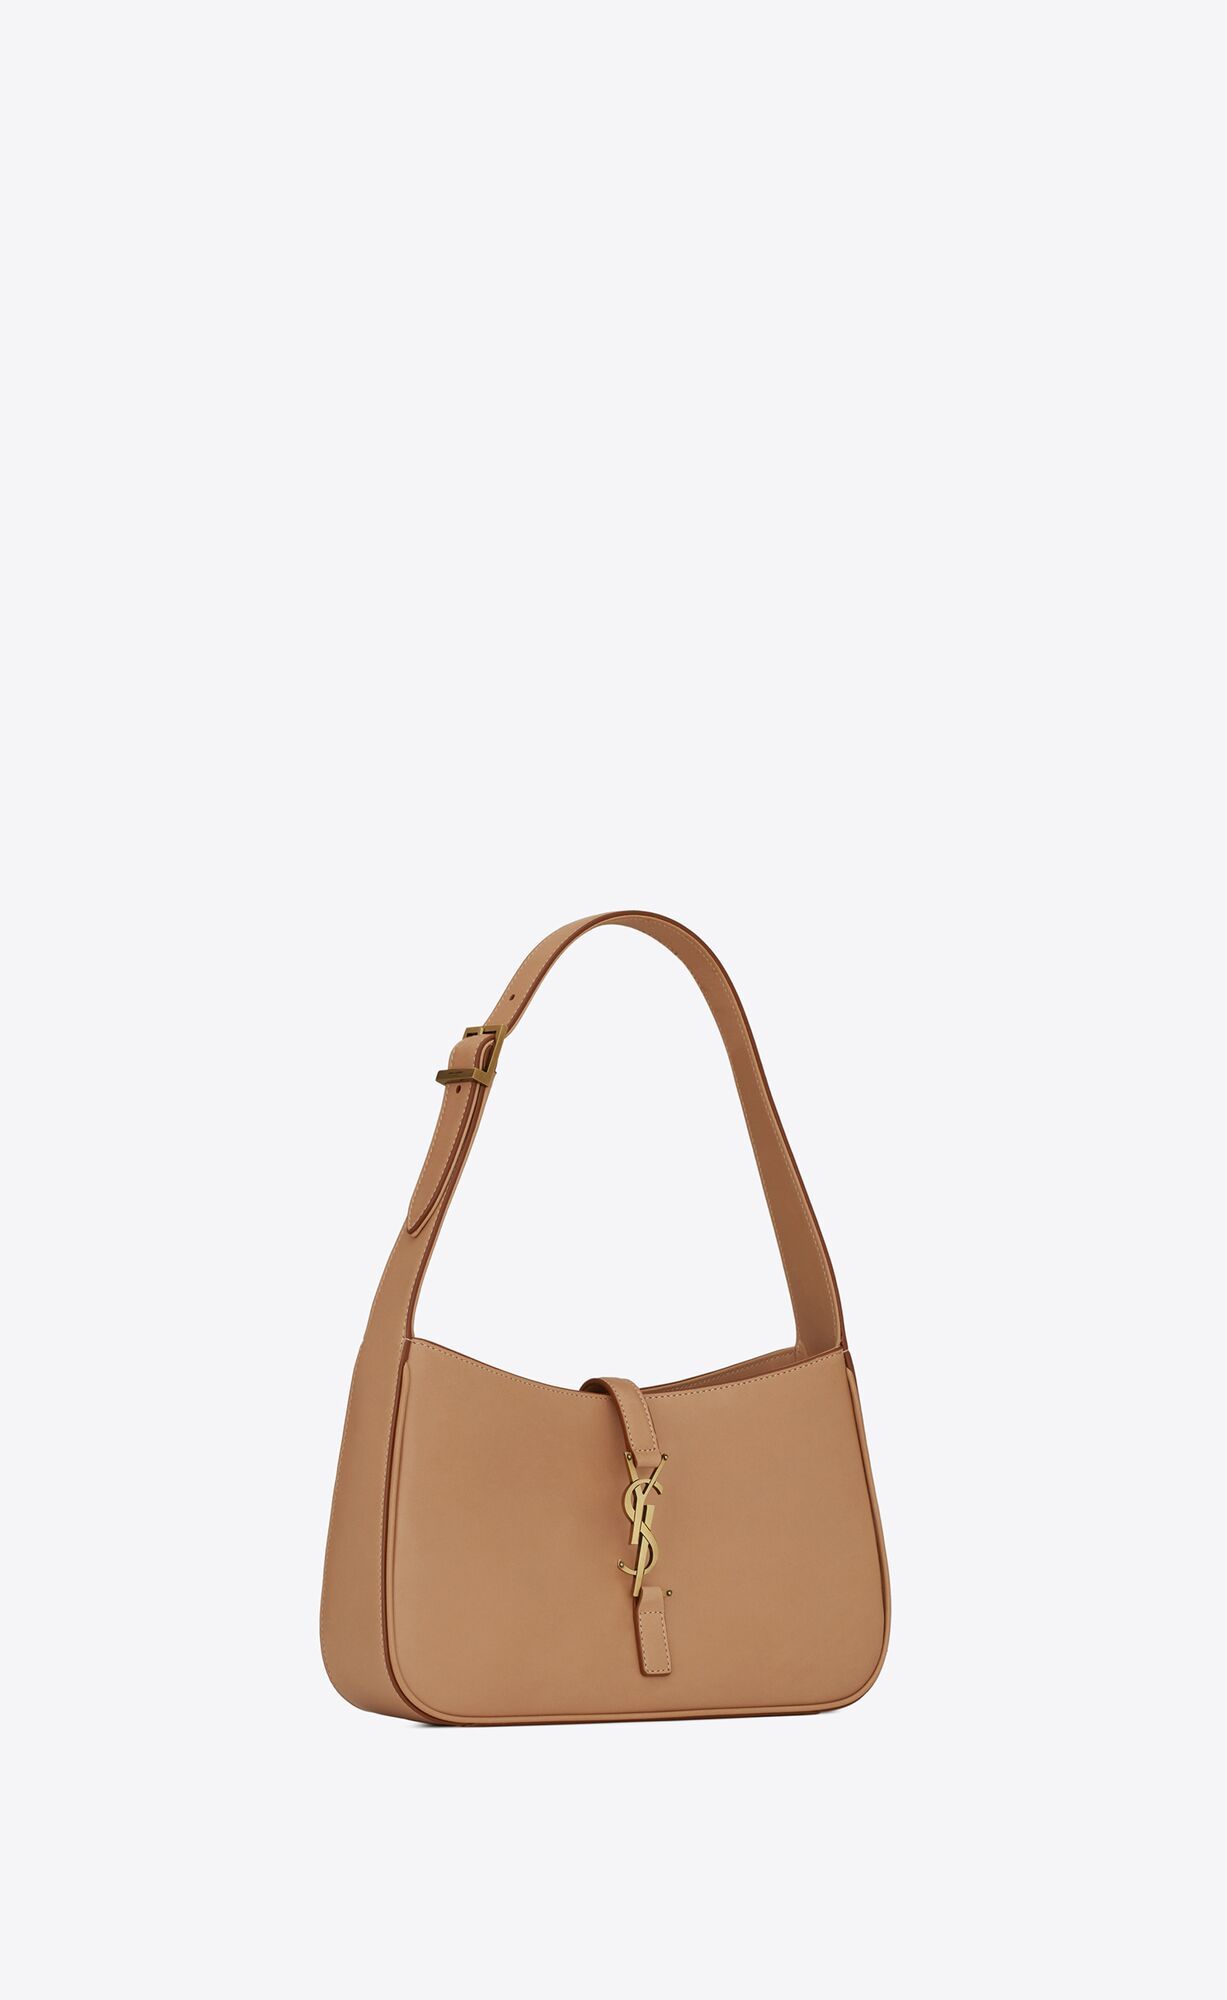 LE 5 À 7 HOBO BAG IN VEGETABLE-TANNED LEATHER | Saint Laurent __locale_country__ | YSL.com | Saint Laurent Inc. (Global)